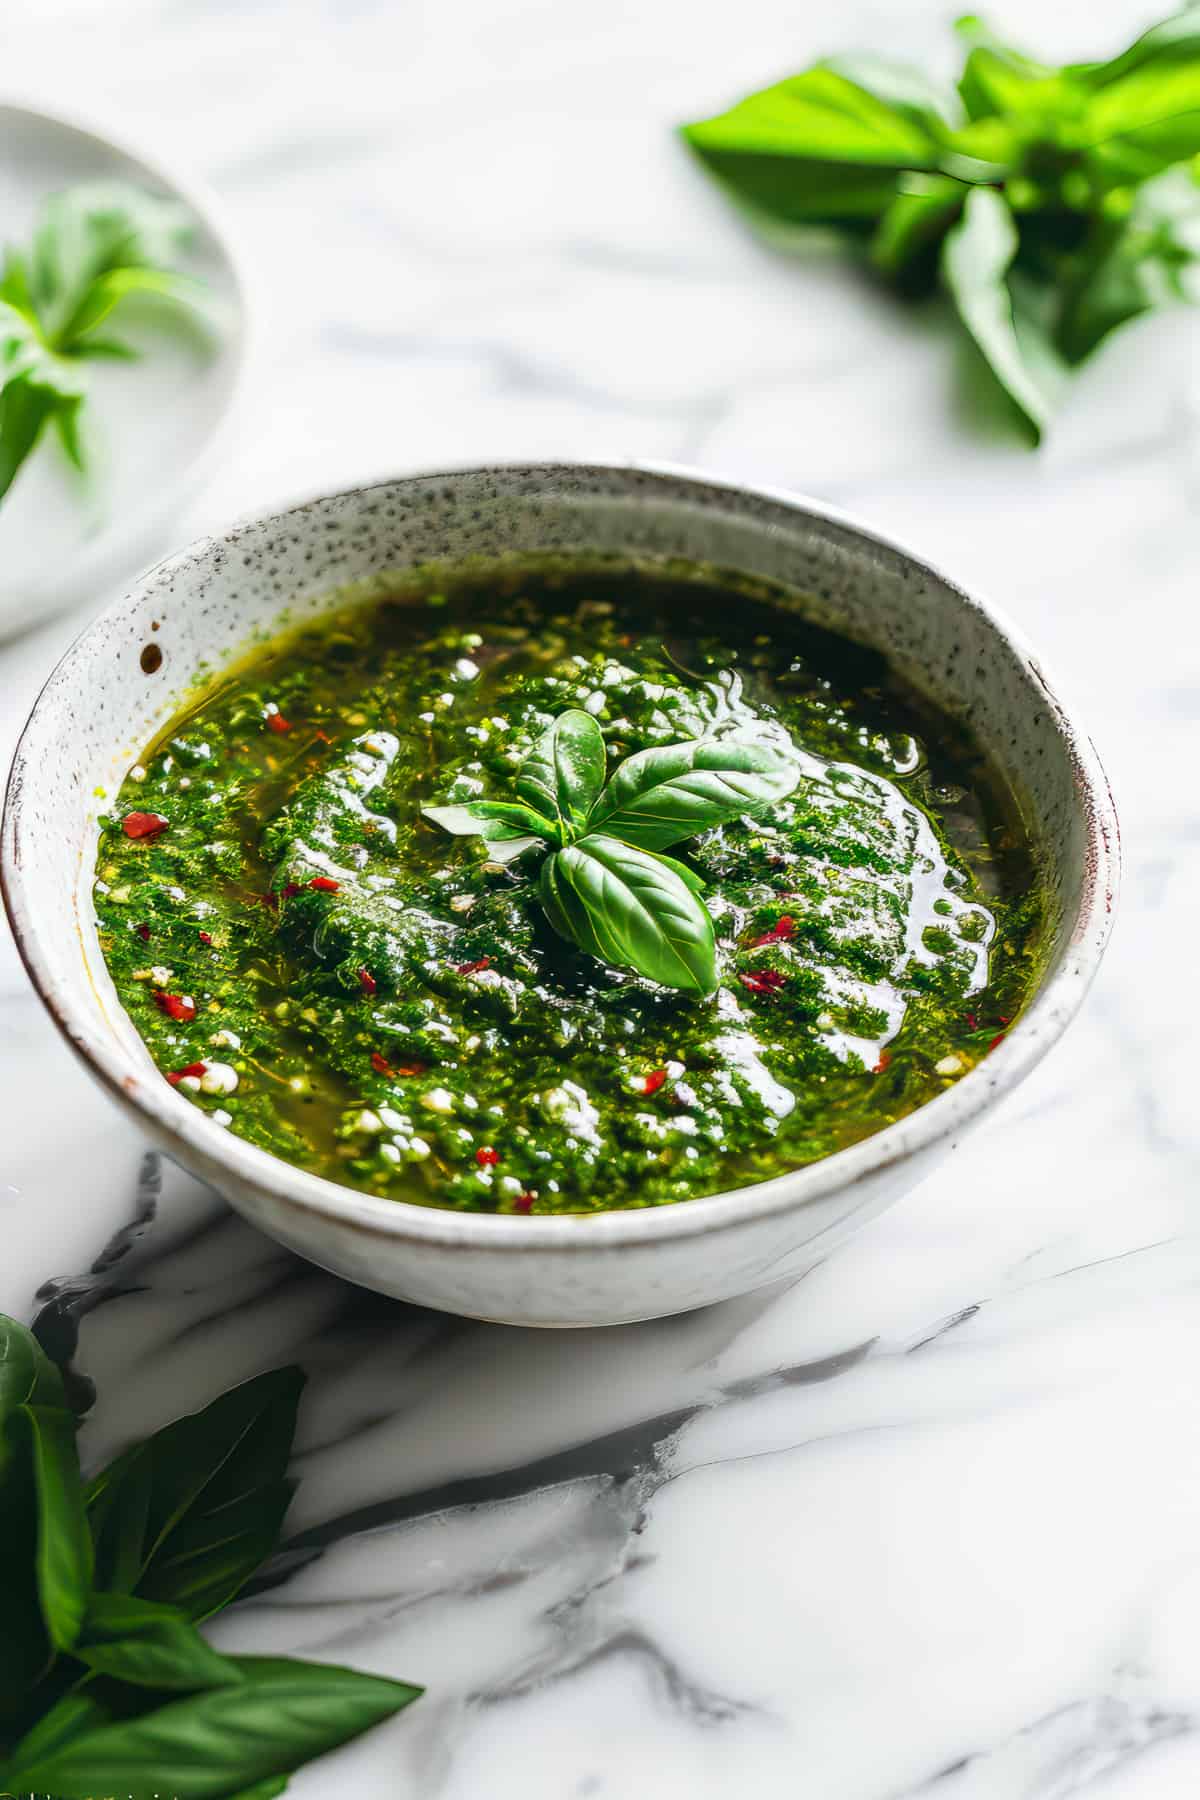 Chimichurri sauce in a white bowl with chili flakes.